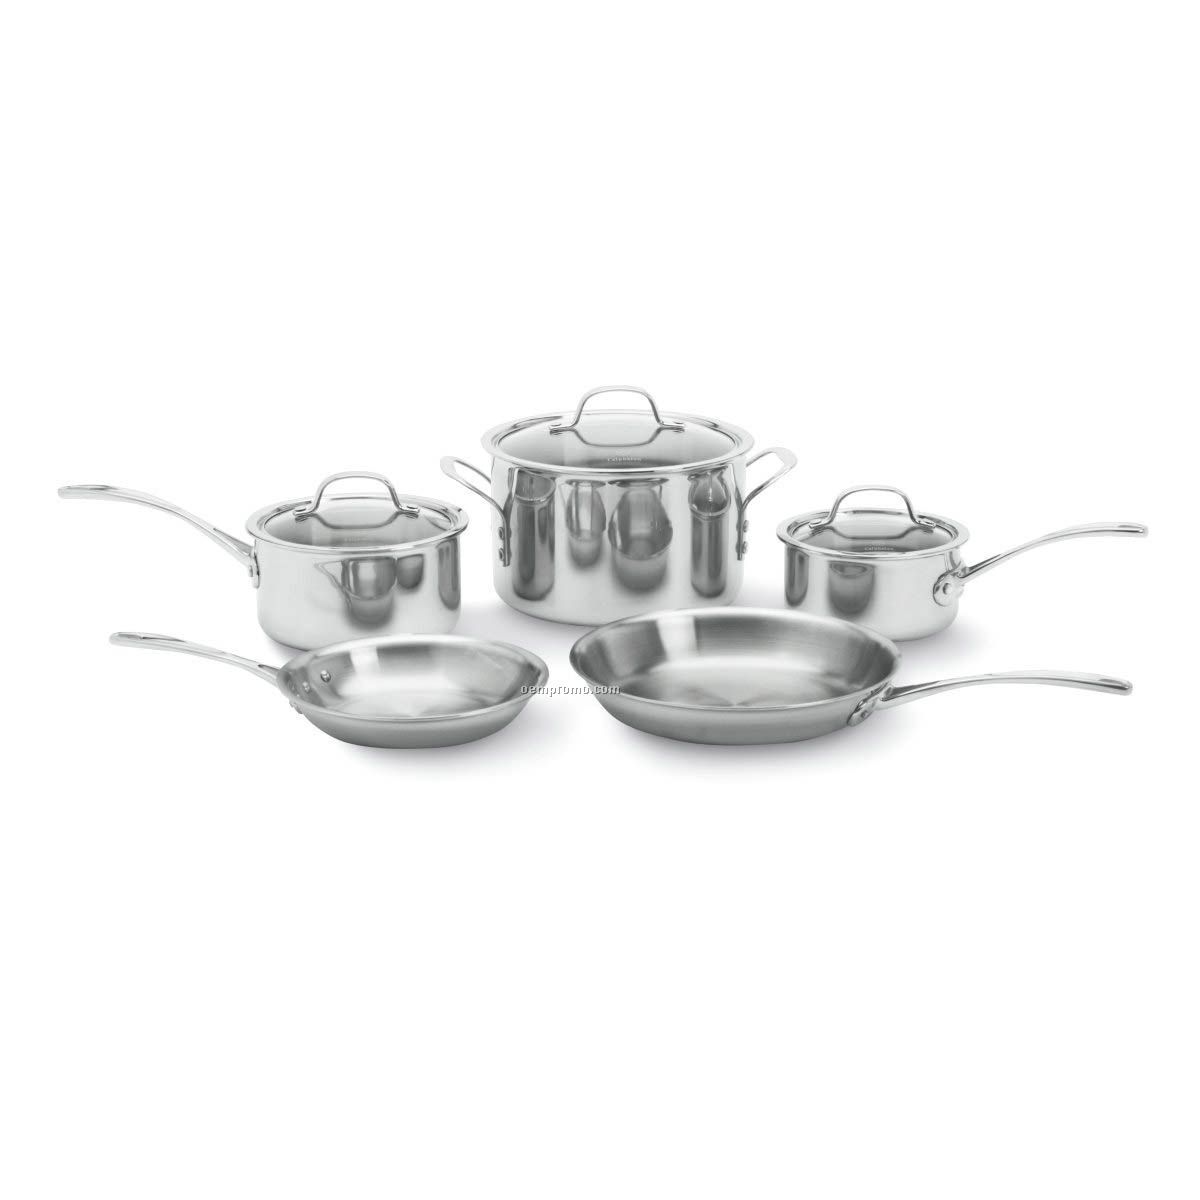 Calphalon 8piece Tri Ply Stainless Steel Cookware Set